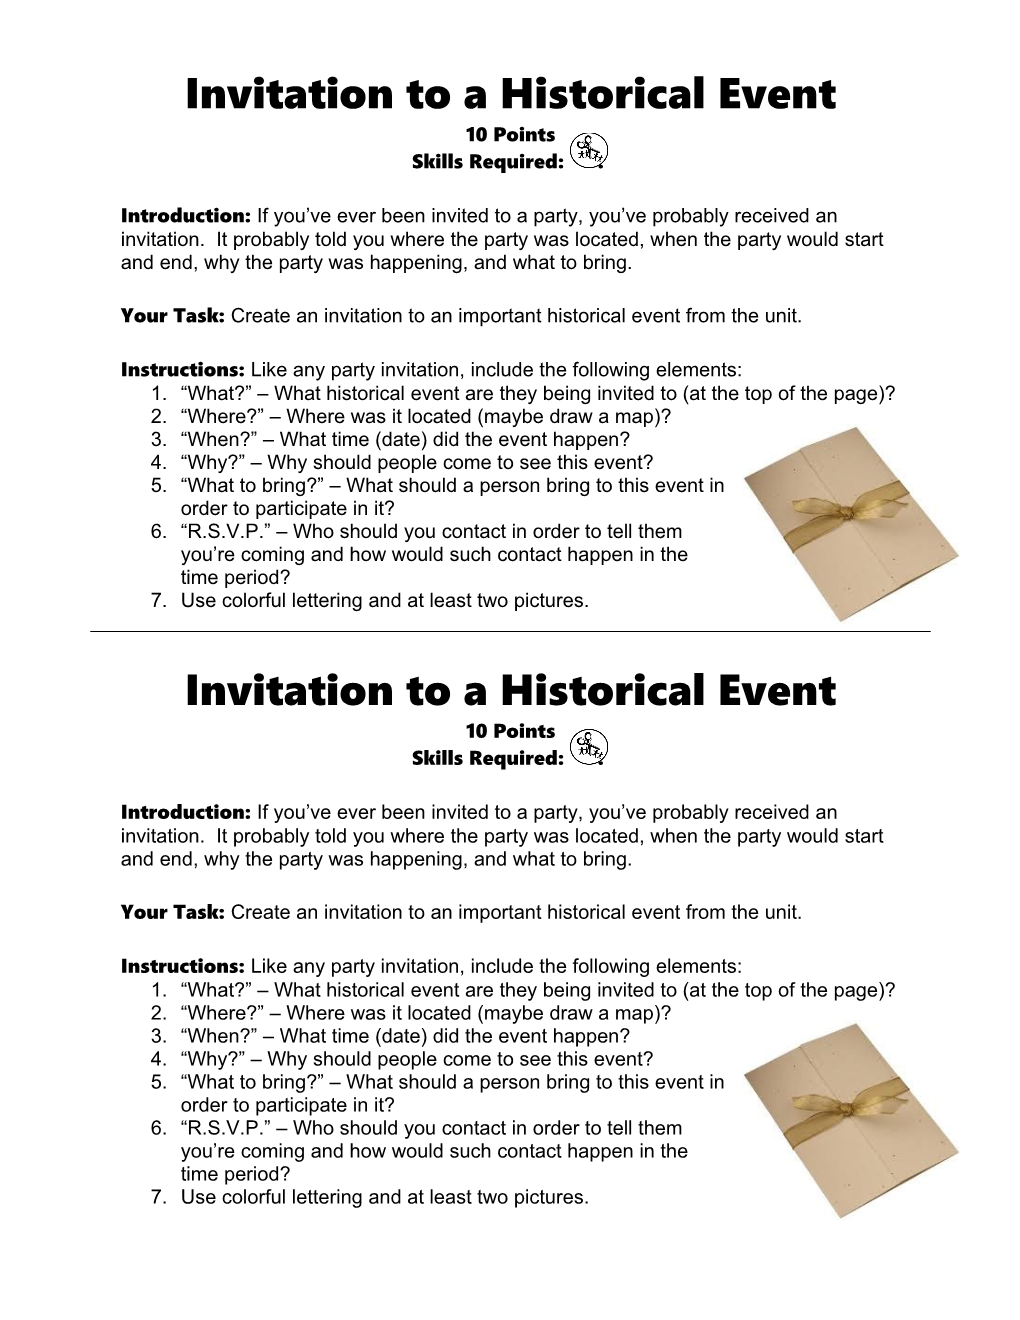 Invitation to a Historical Event